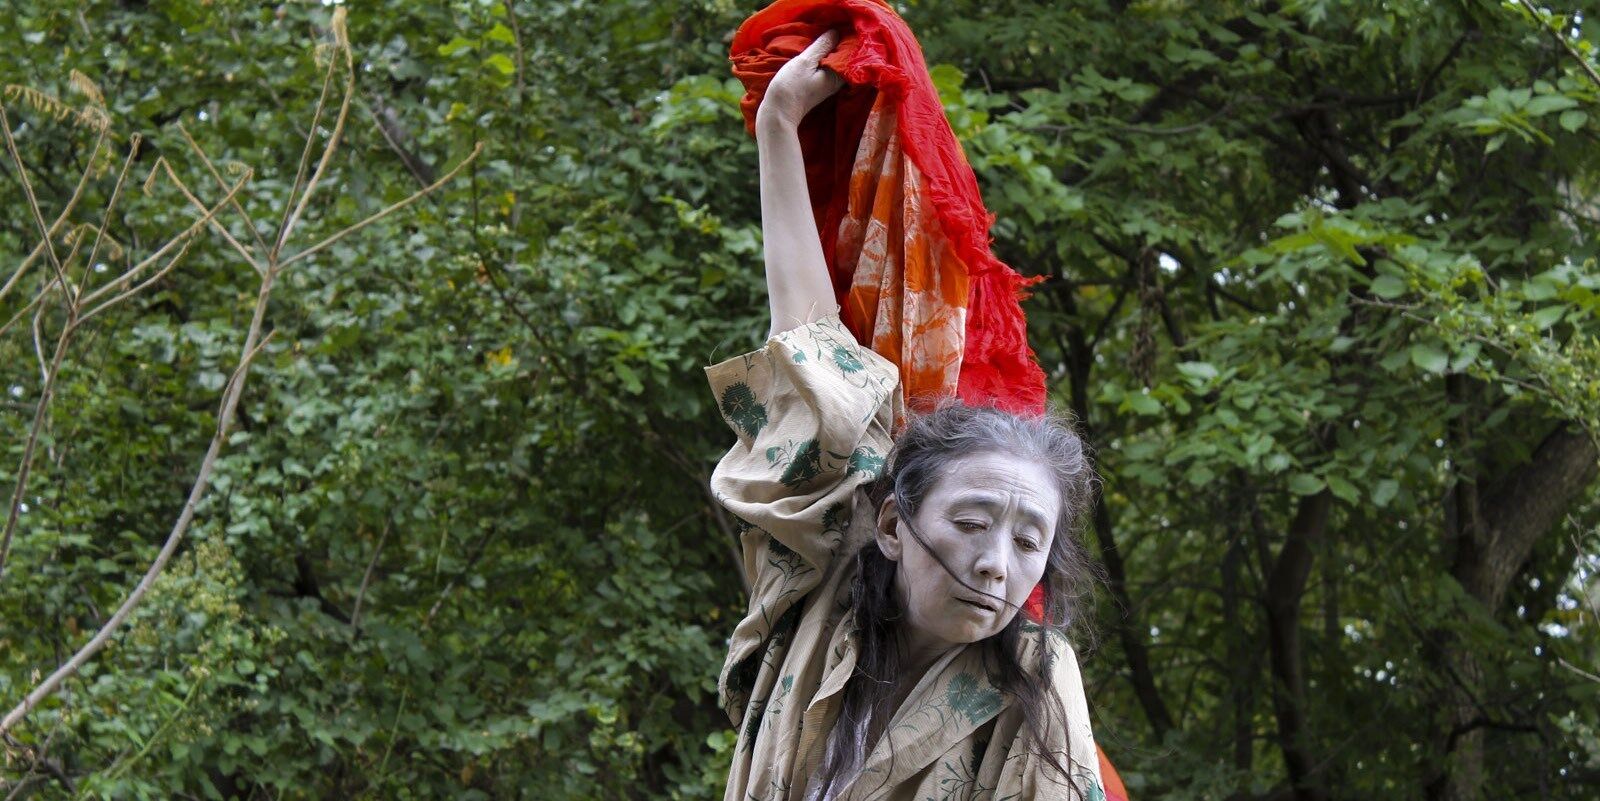 woman with red cloth dances in front of trees